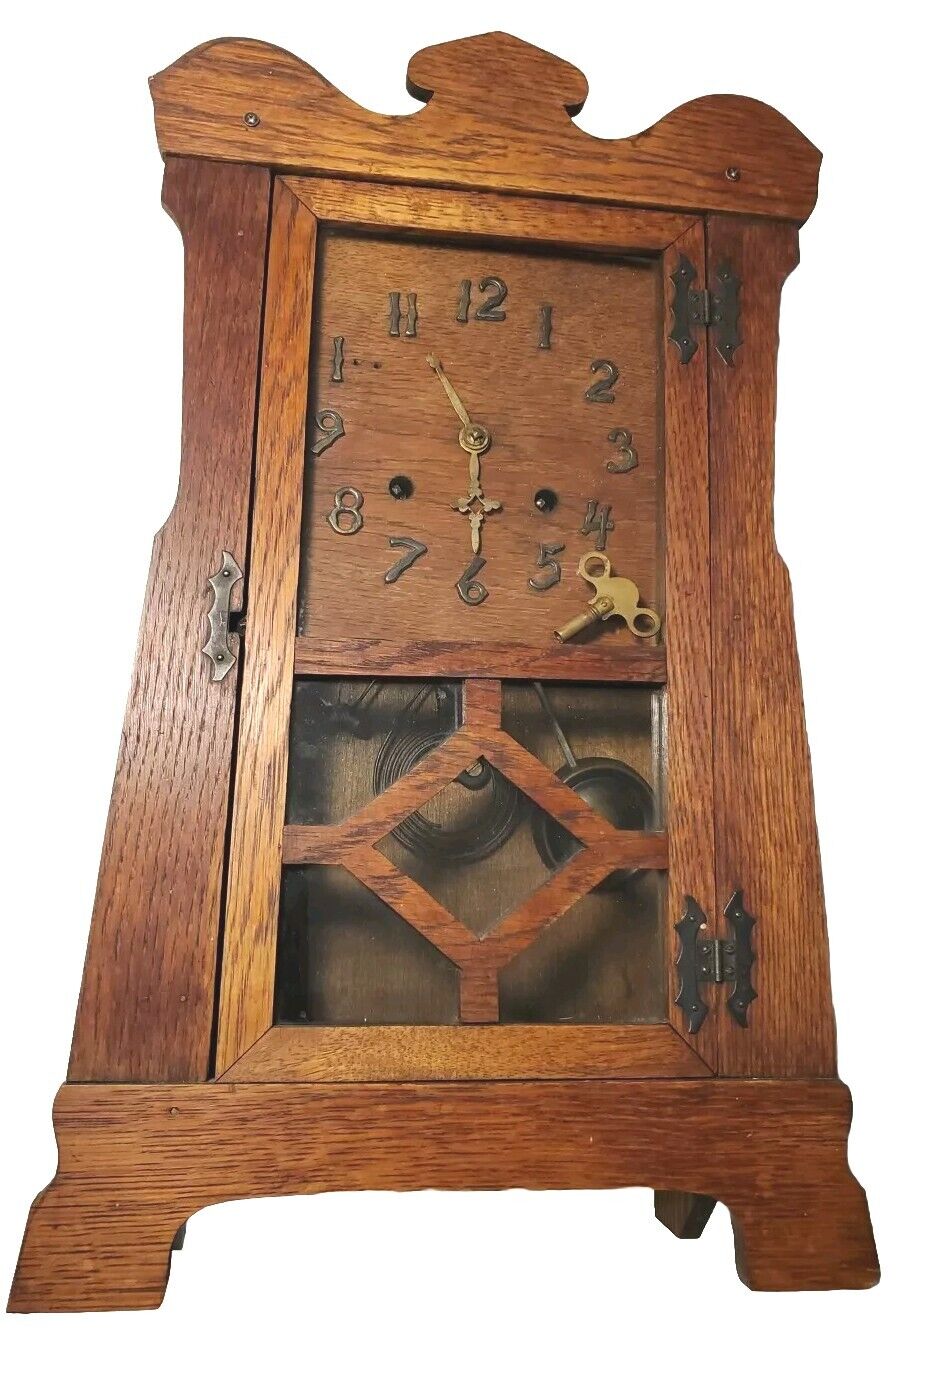 Mission Clock Parts Or Display Key Pendulum Chimes Wood Antique Look Pictures 21